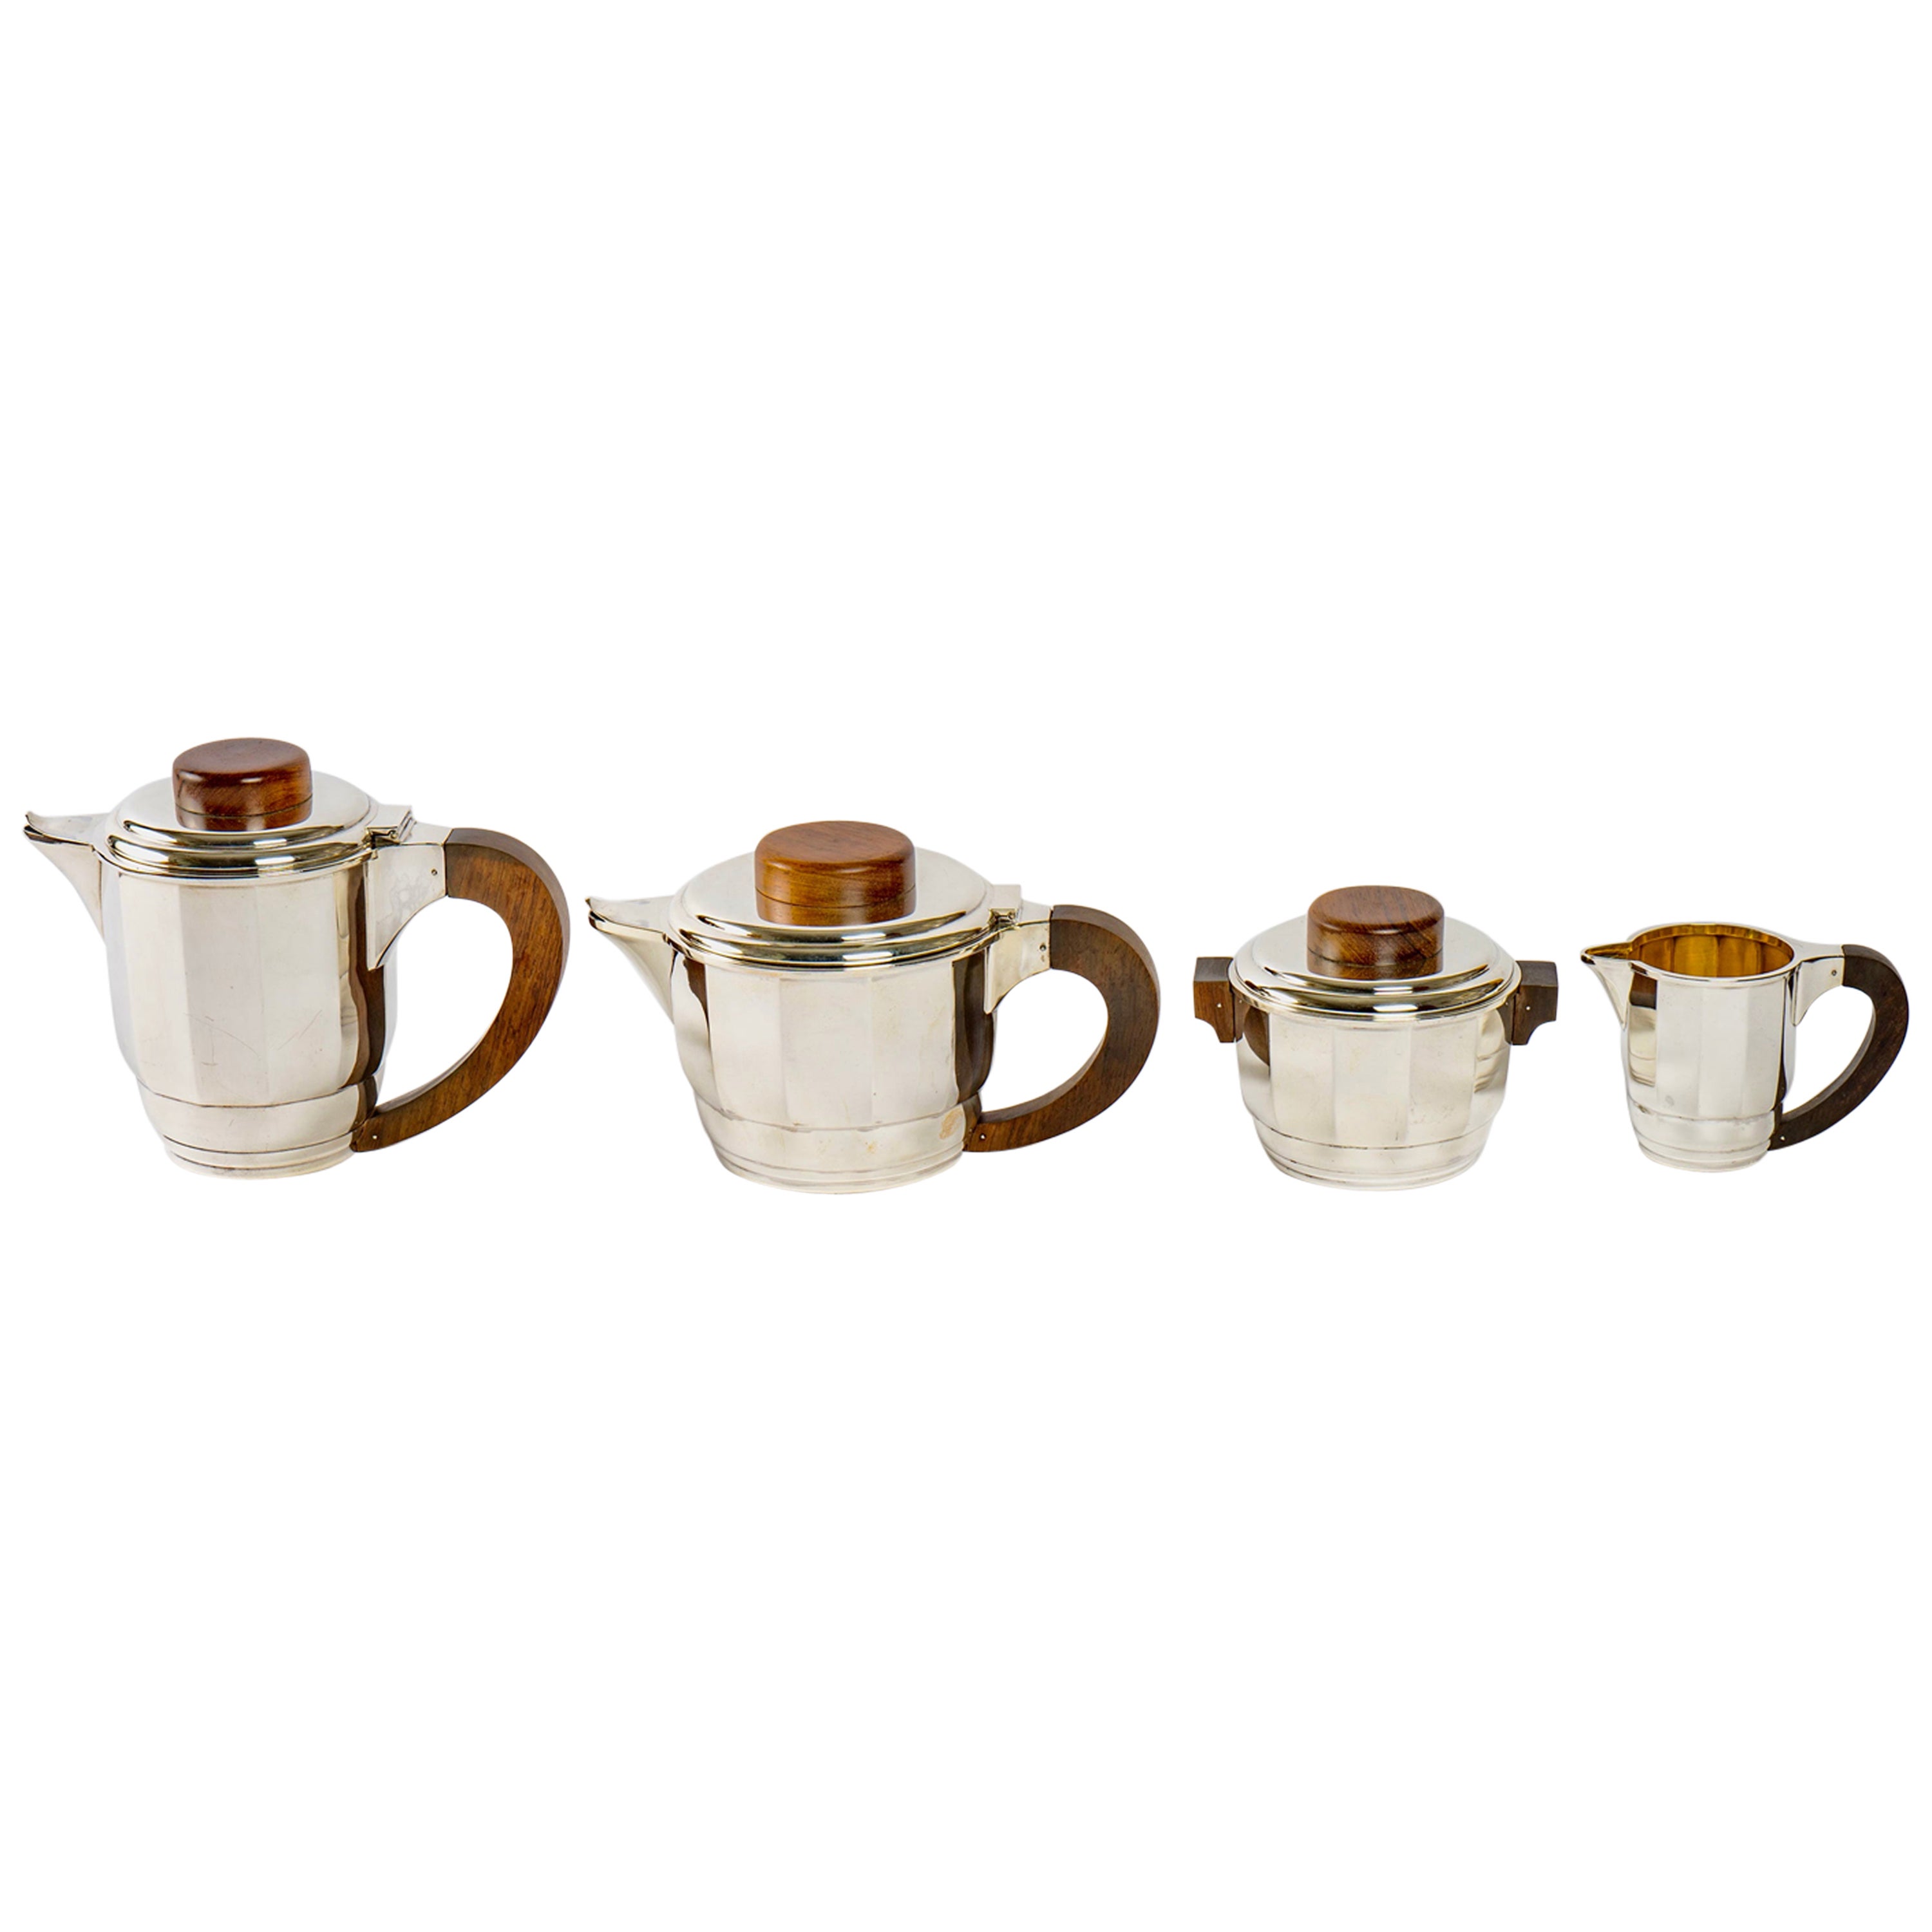 1925 Puiforcat Art Deco Tea and Coffee Set in Sterling Silver and Rosewood